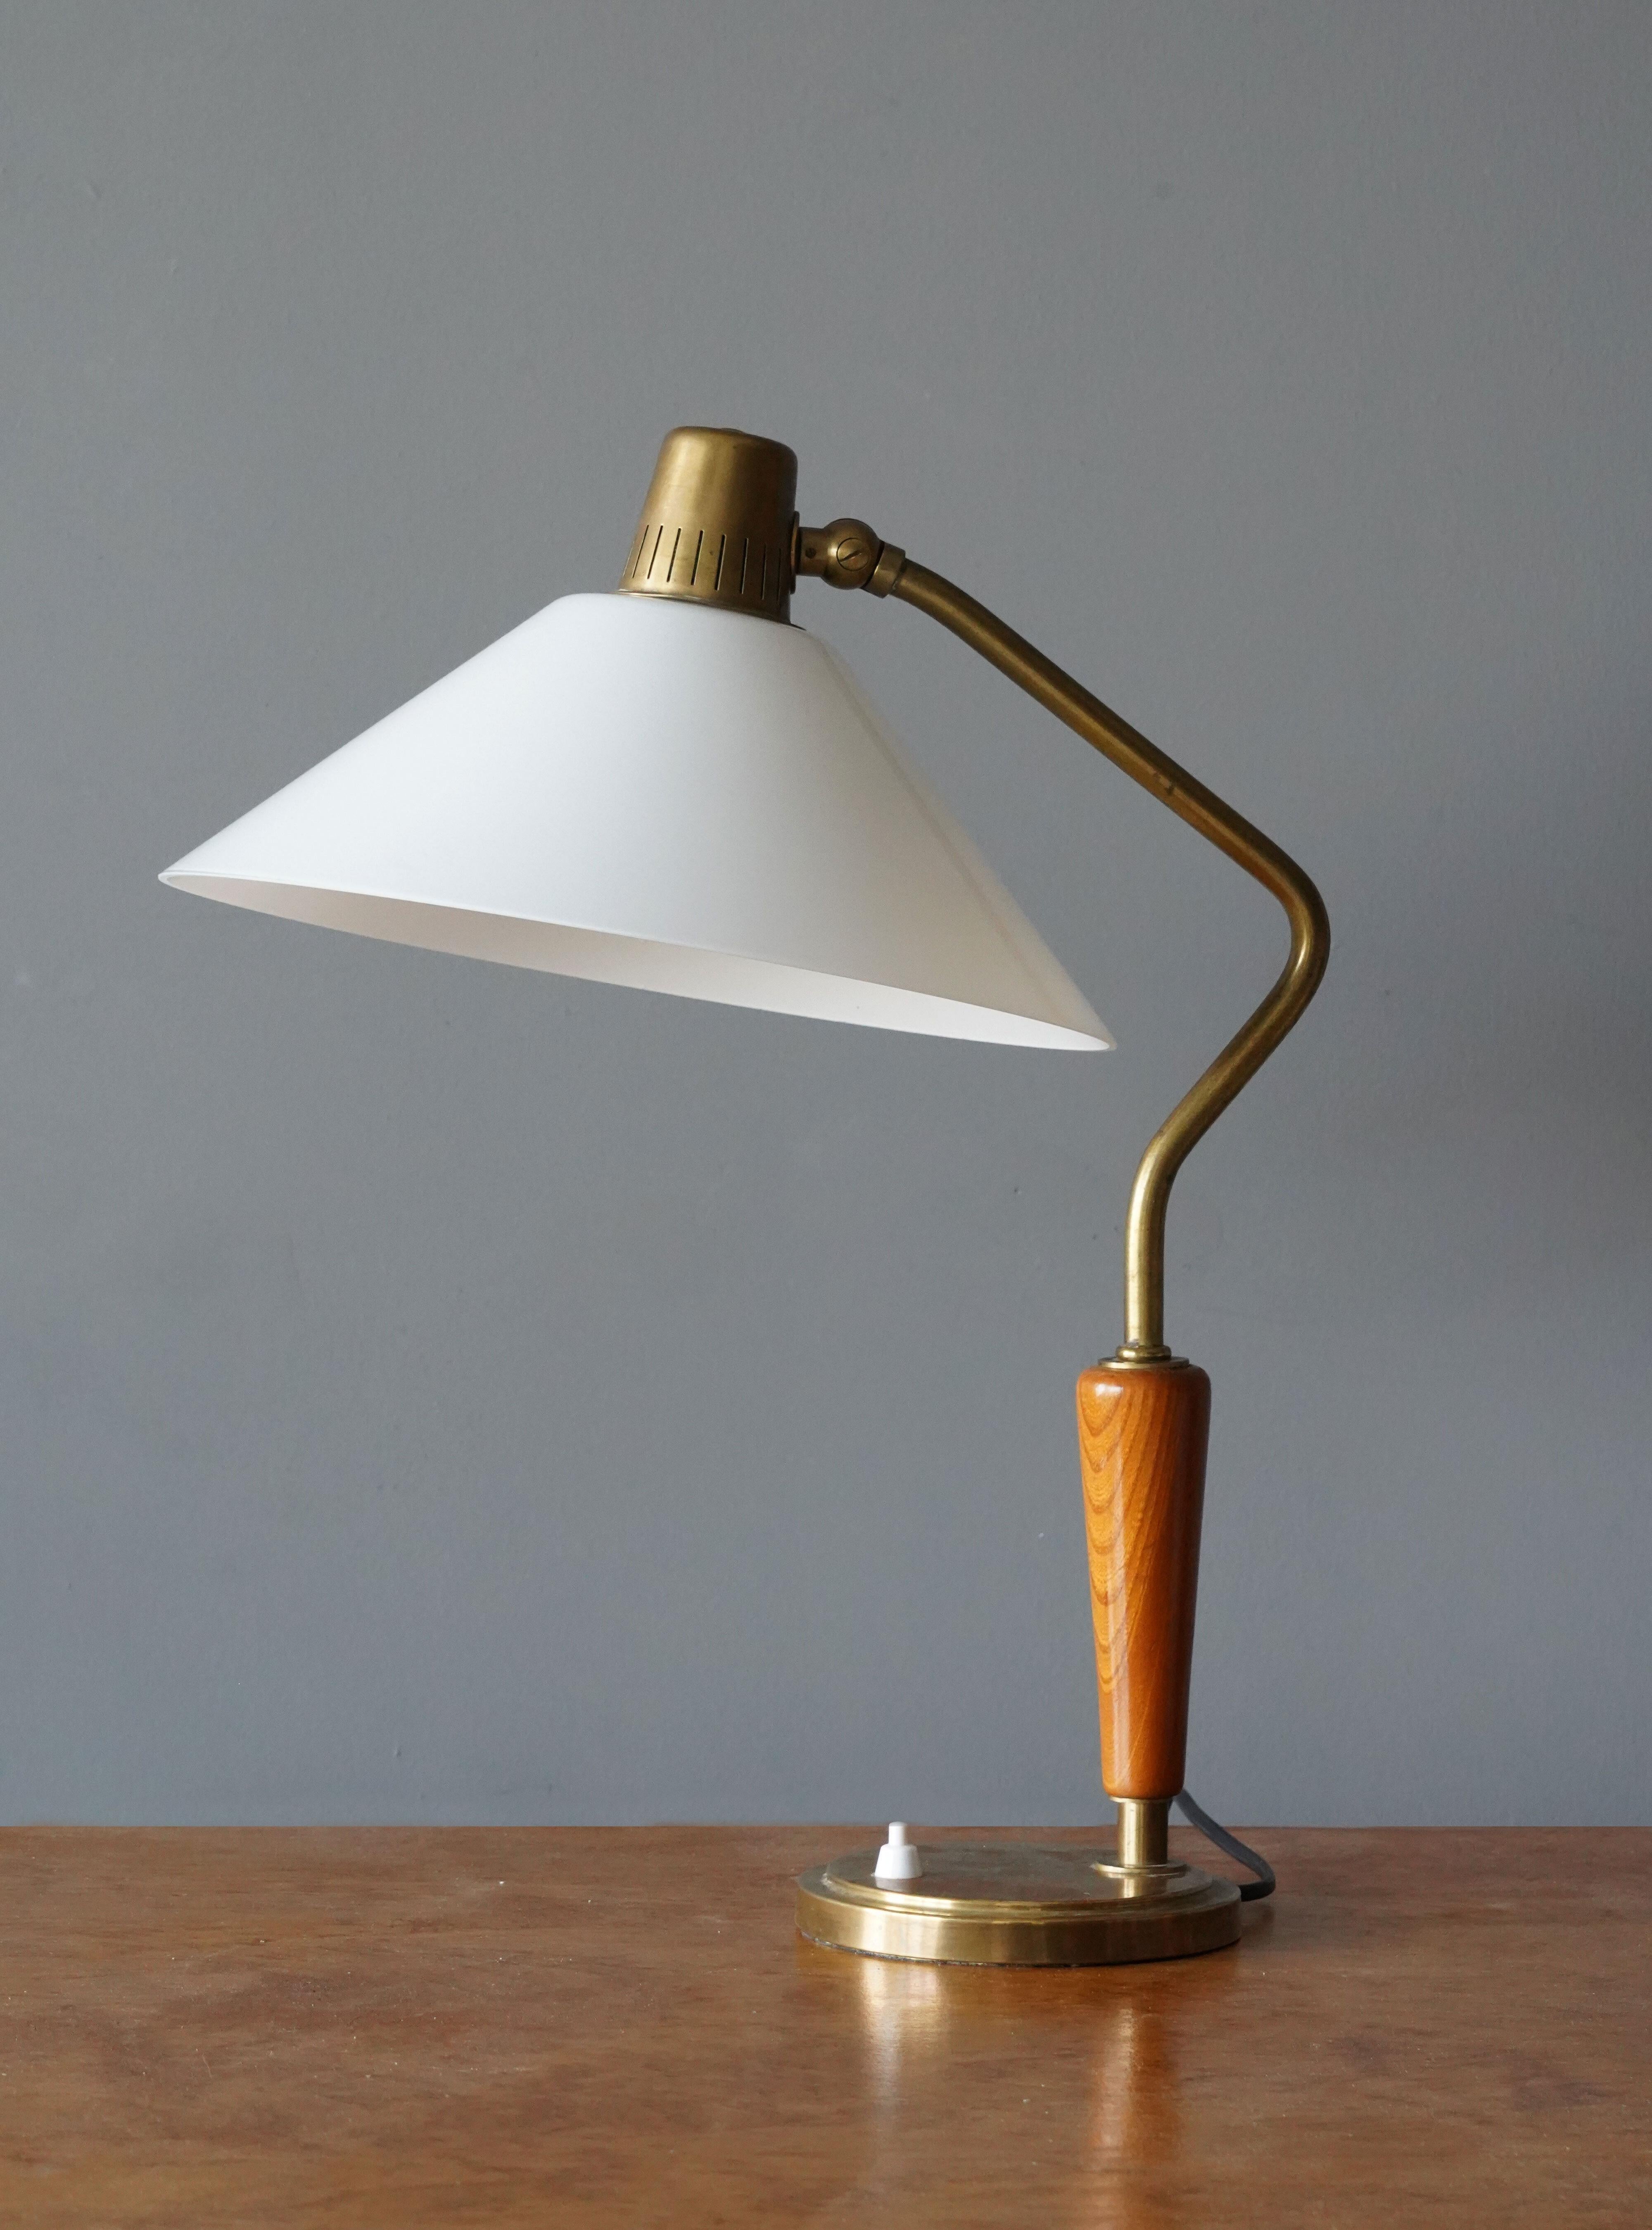 An adjustable table lamp. Designed by Harald Notini. Manufactured by Böhlmarks Lampfabrik, Sweden, 1940s. Brass and elm and milk glass. Documented and stamped with makers mark and model number to underside.

Other designers of the period include